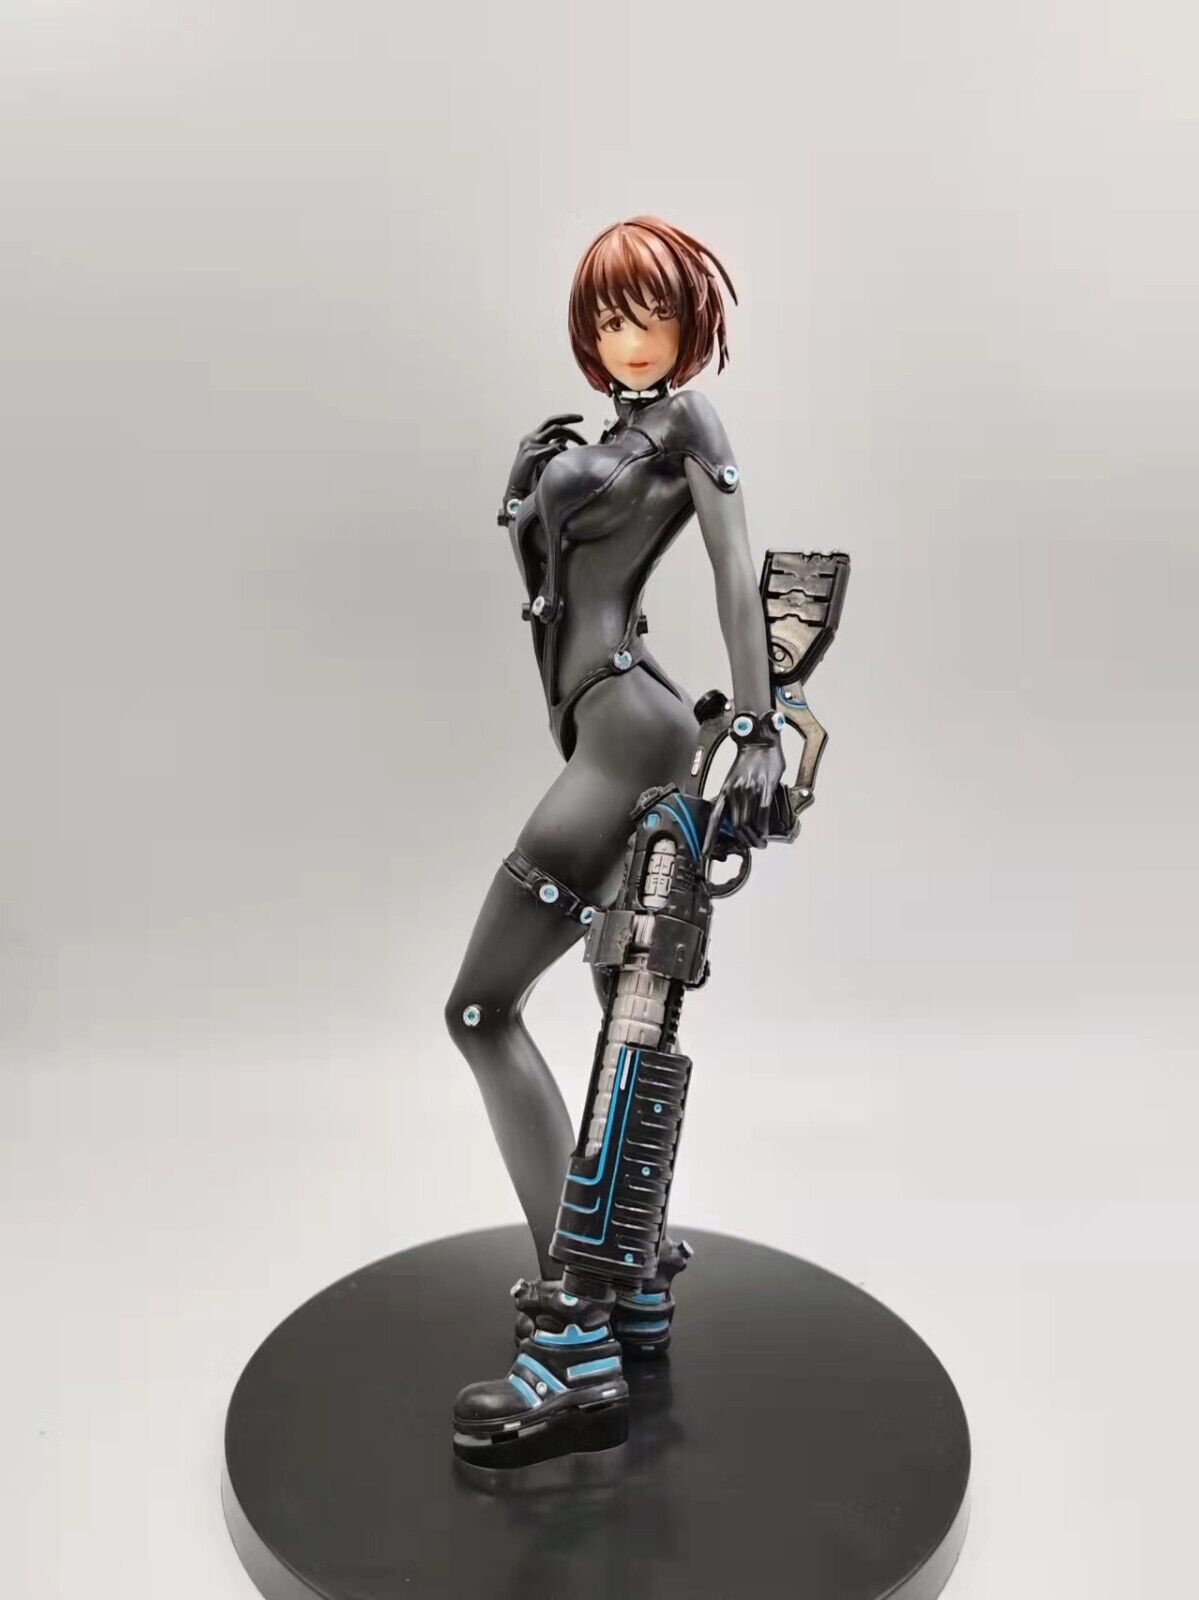 NEW  1/6 28CM Girl Anime Characters Figure Pvc toy gift No Box